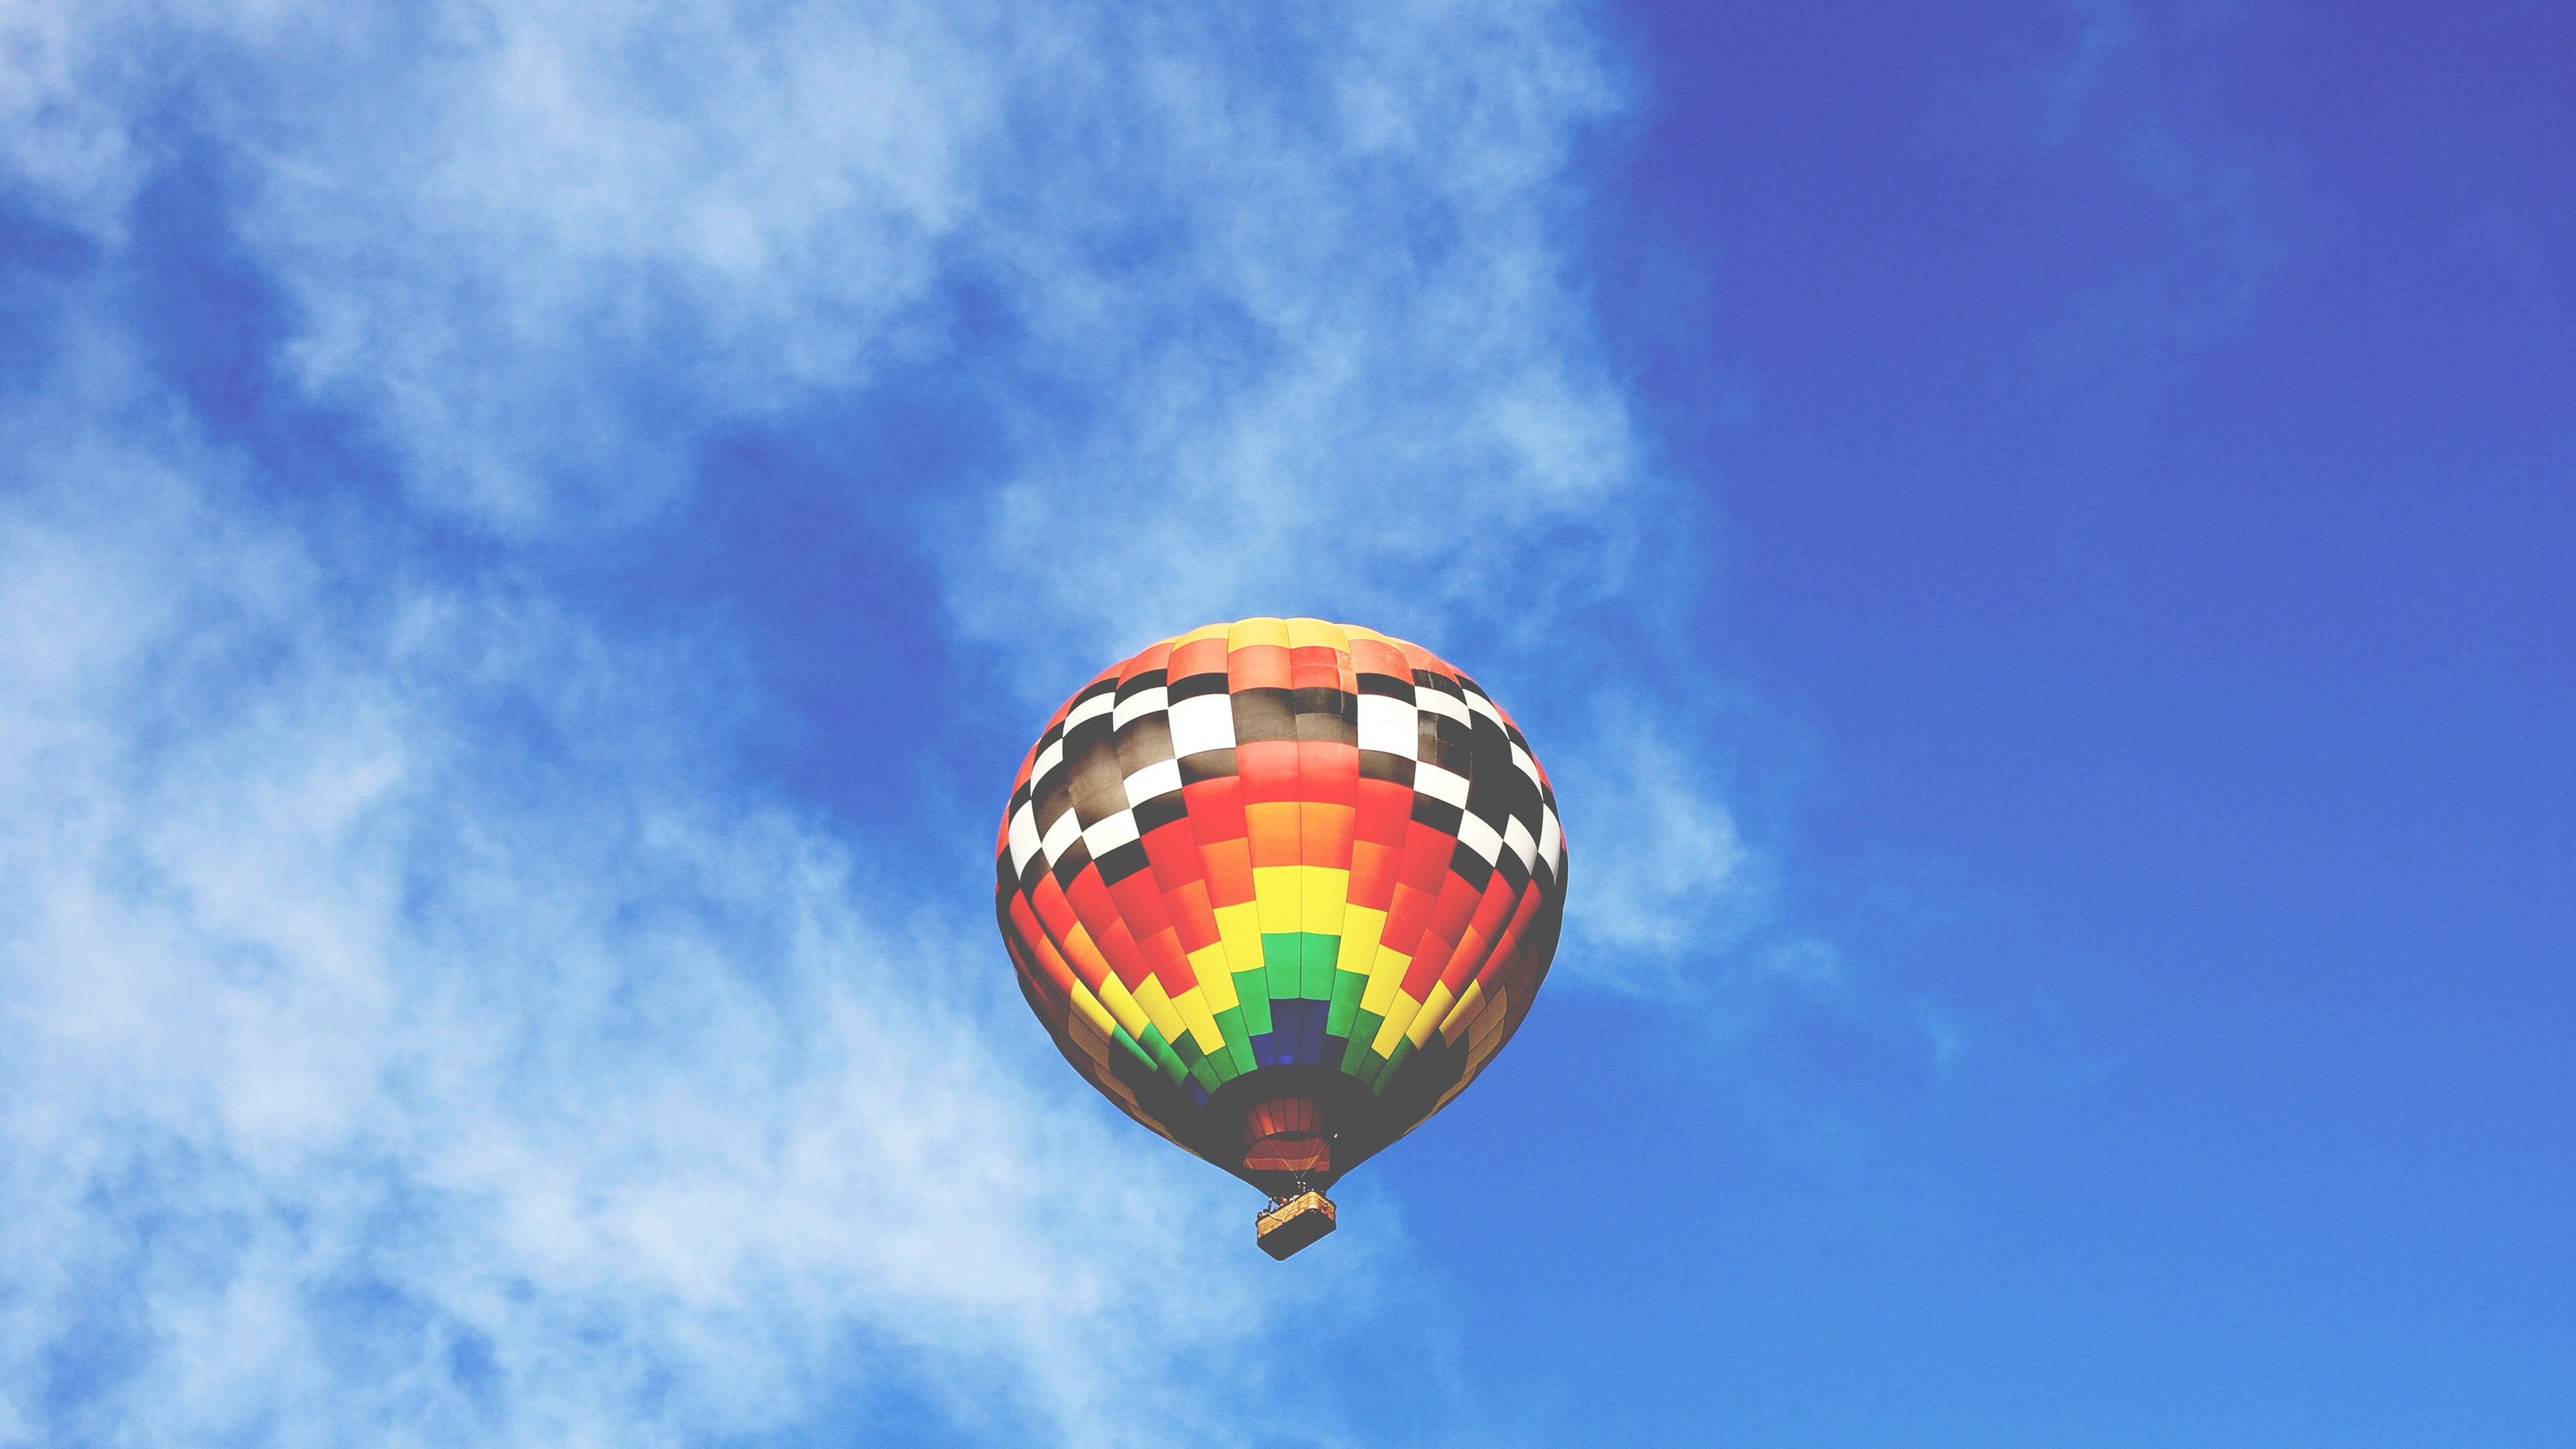 multicolored hot air balloon, photography, clear sky, clouds, hot air balloons